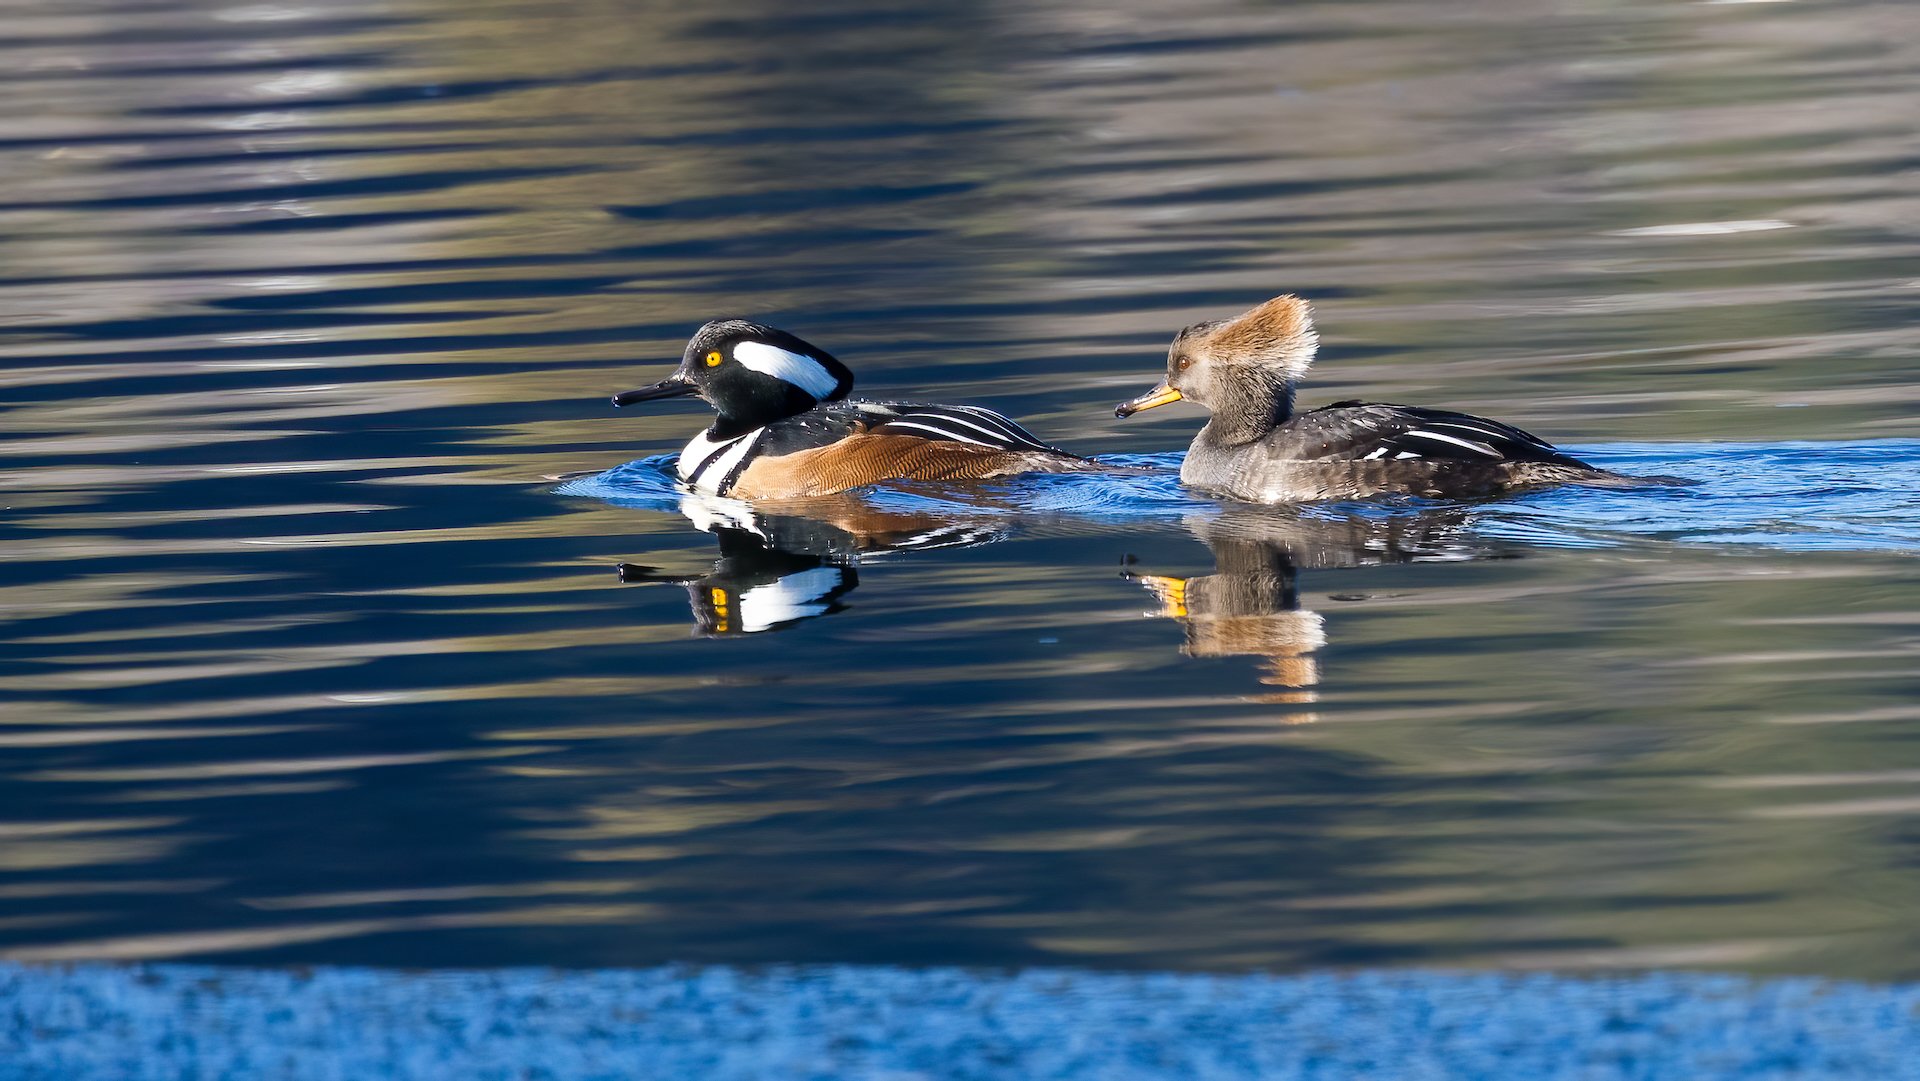  A few more shots of the Hooded Mergansers - they are such beautiful birds.  